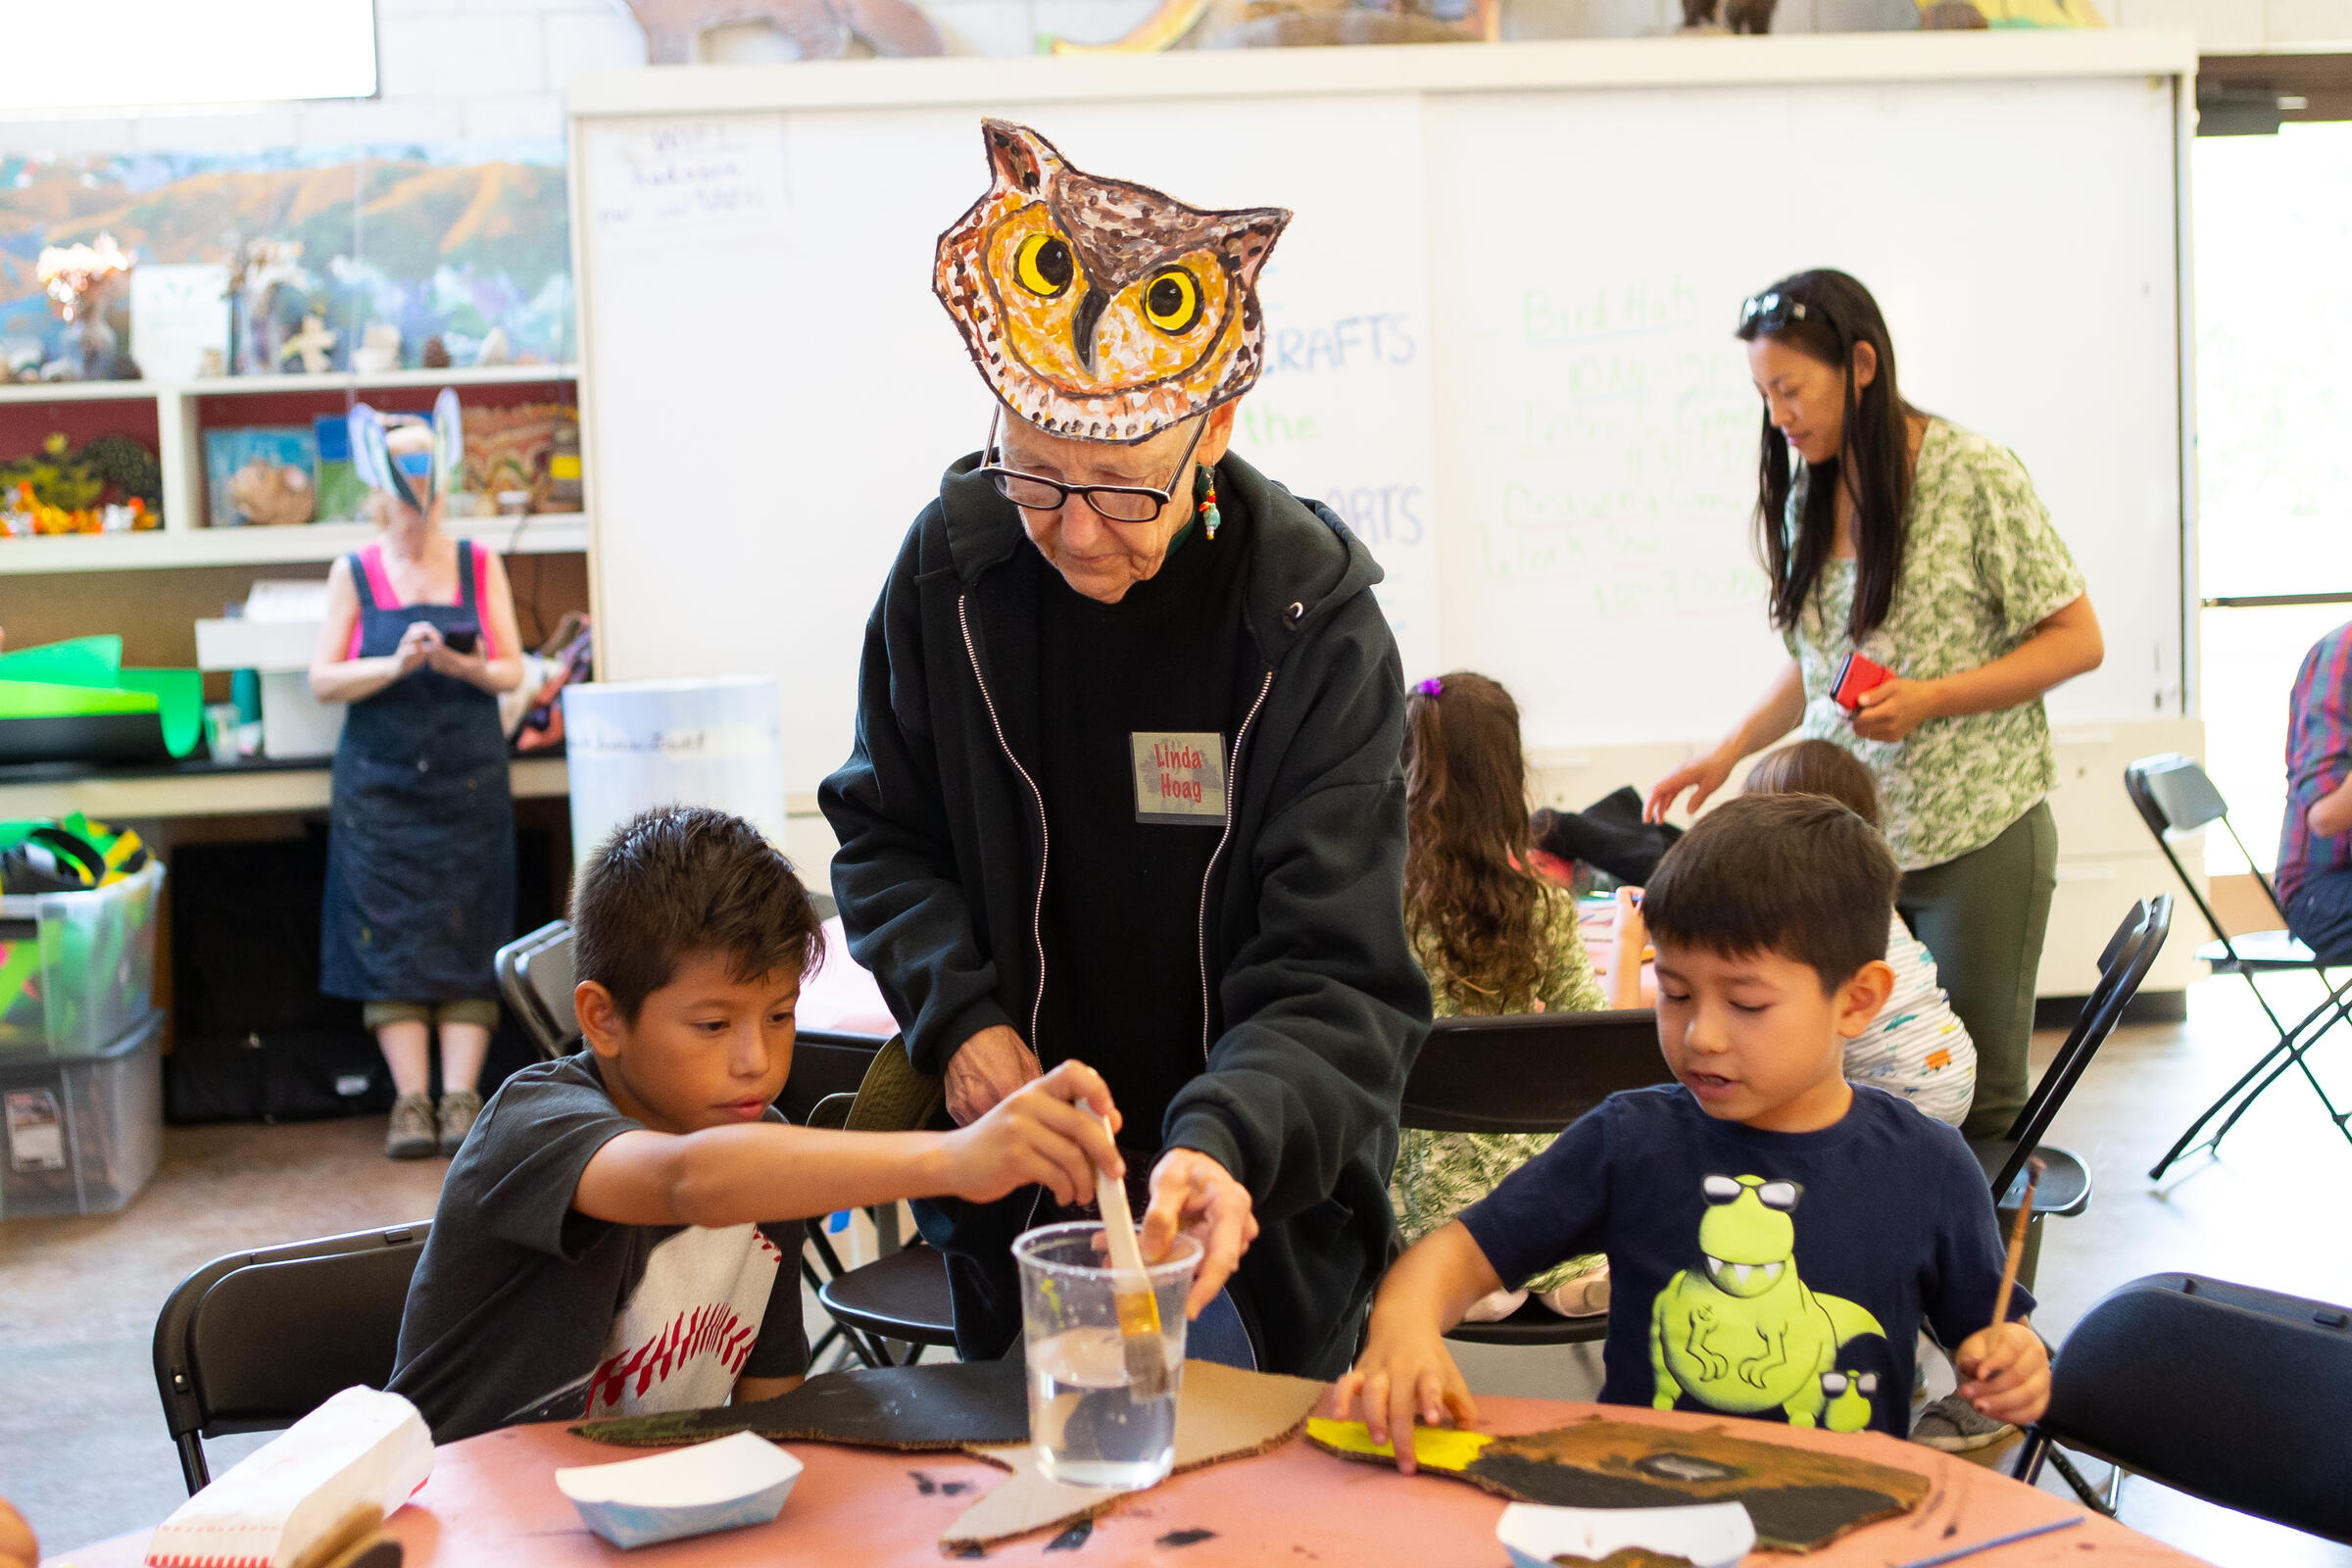 Member of Arroyo Arts Collective helps kids create bird hats in celebration of the Bird LA Day Festival.